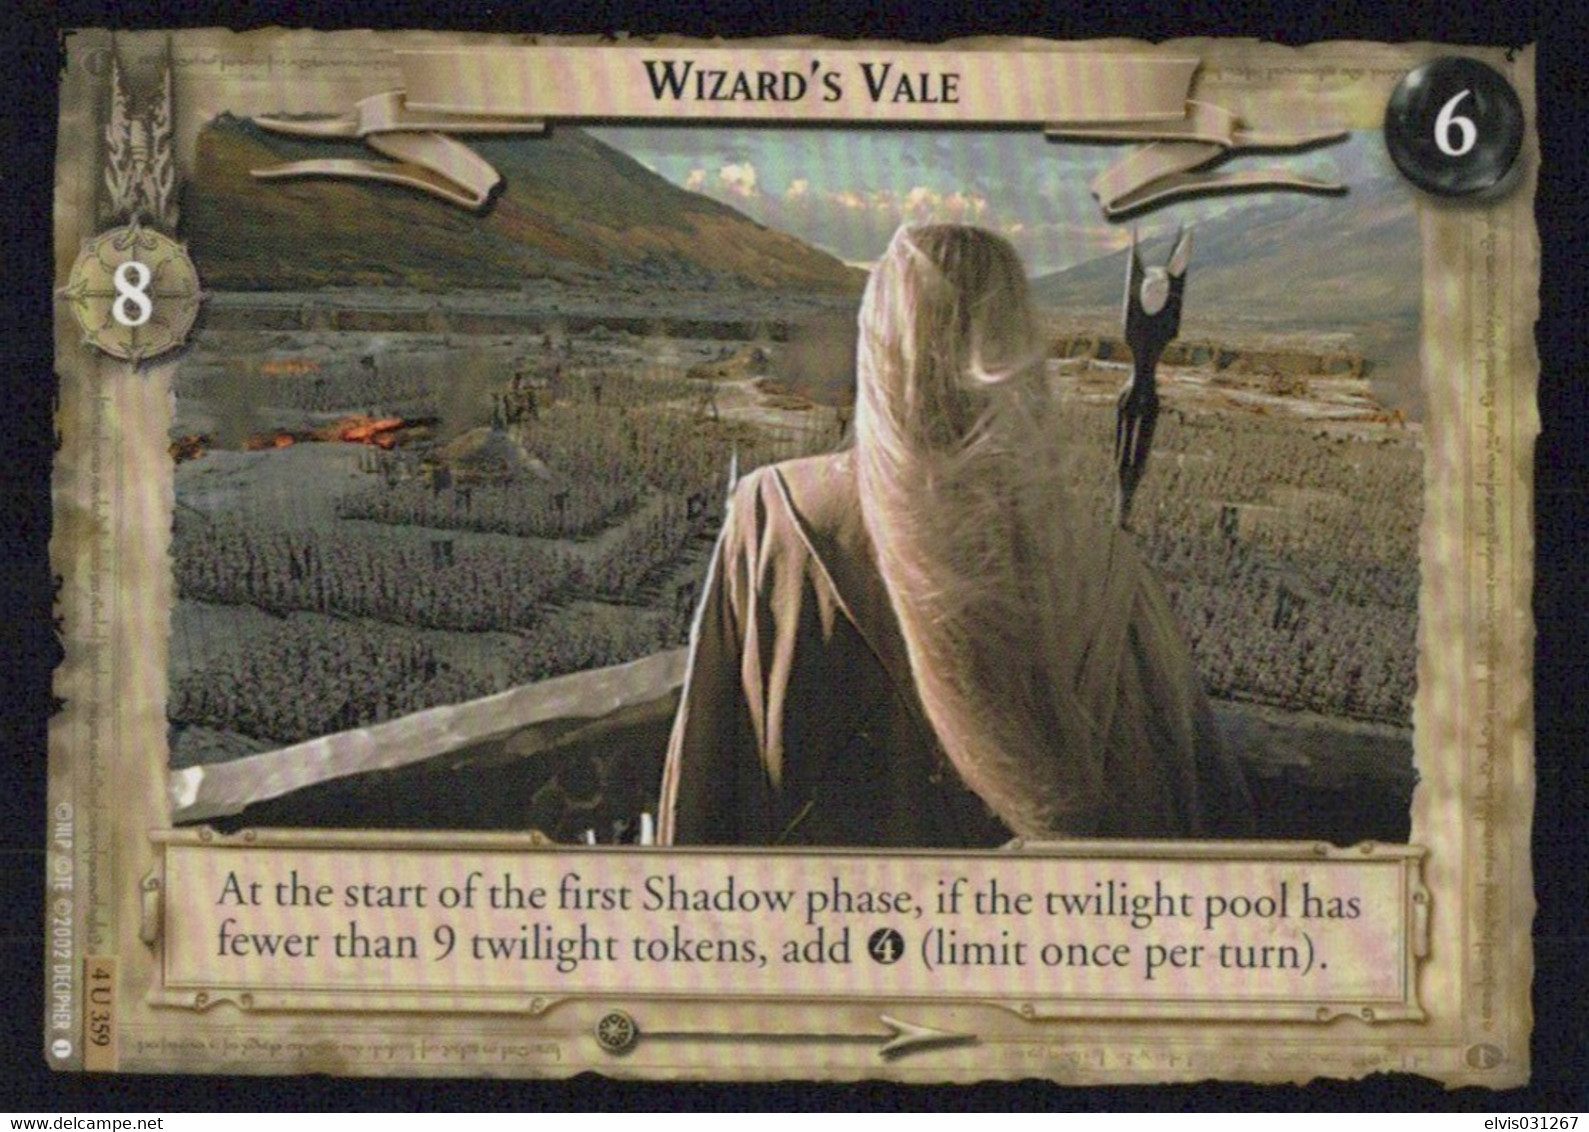 Vintage The Lord Of The Rings: #6-8 Wizard's Vale - EN - 2001-2004 - Mint Condition - Trading Card Game - Lord Of The Rings